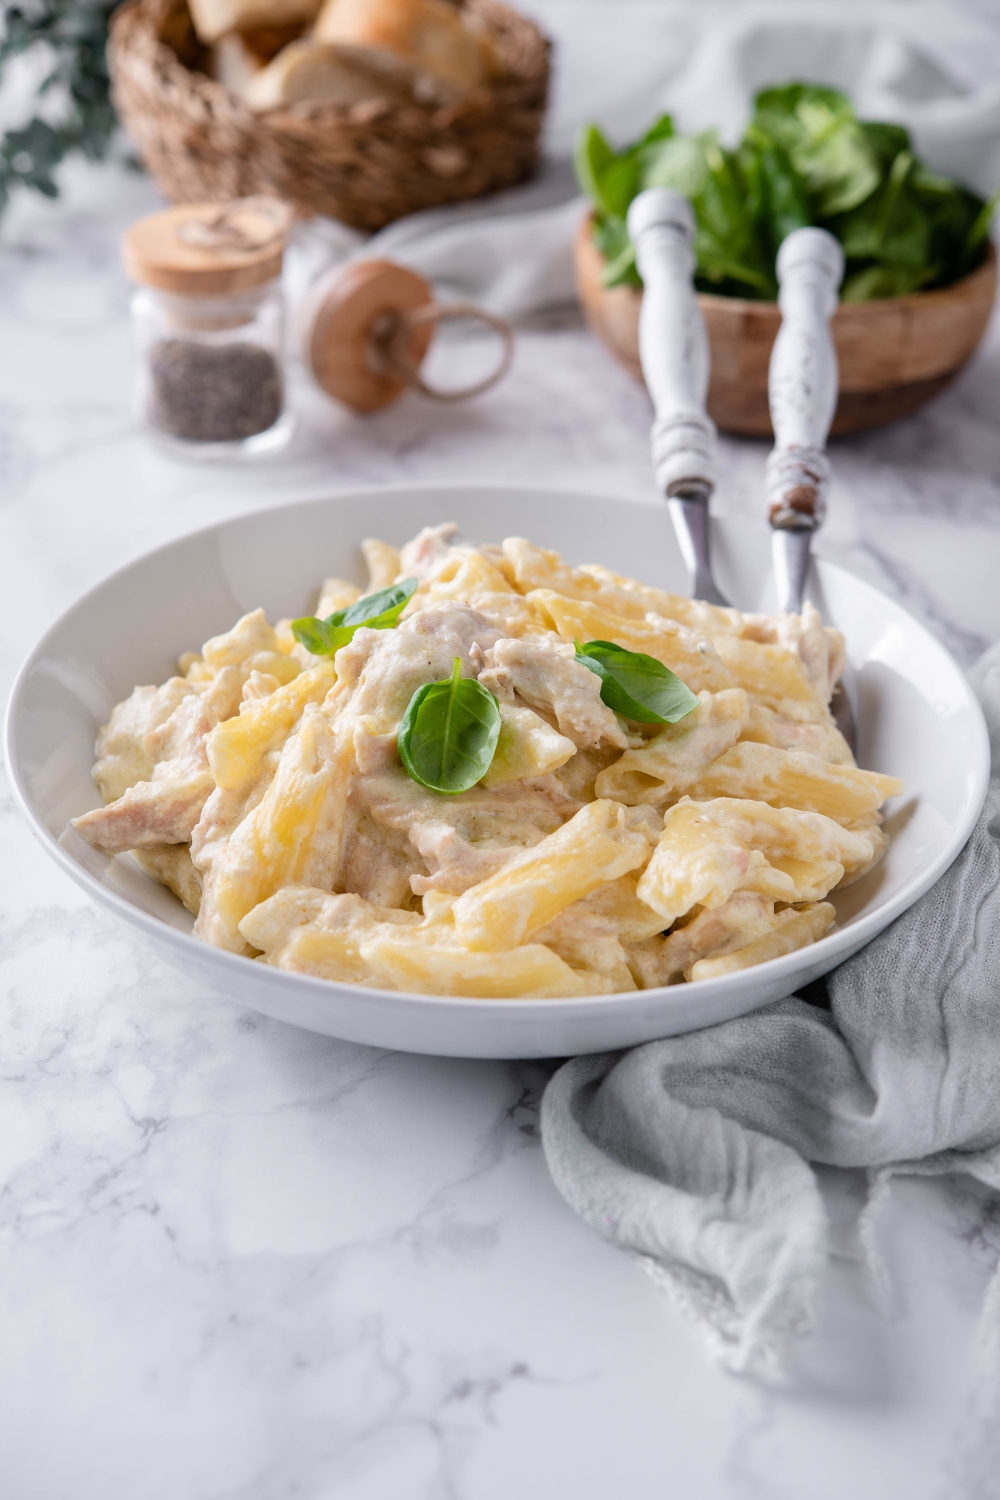 Chicken alfredo garnished with basil and served in a shallow bowl with two forks.